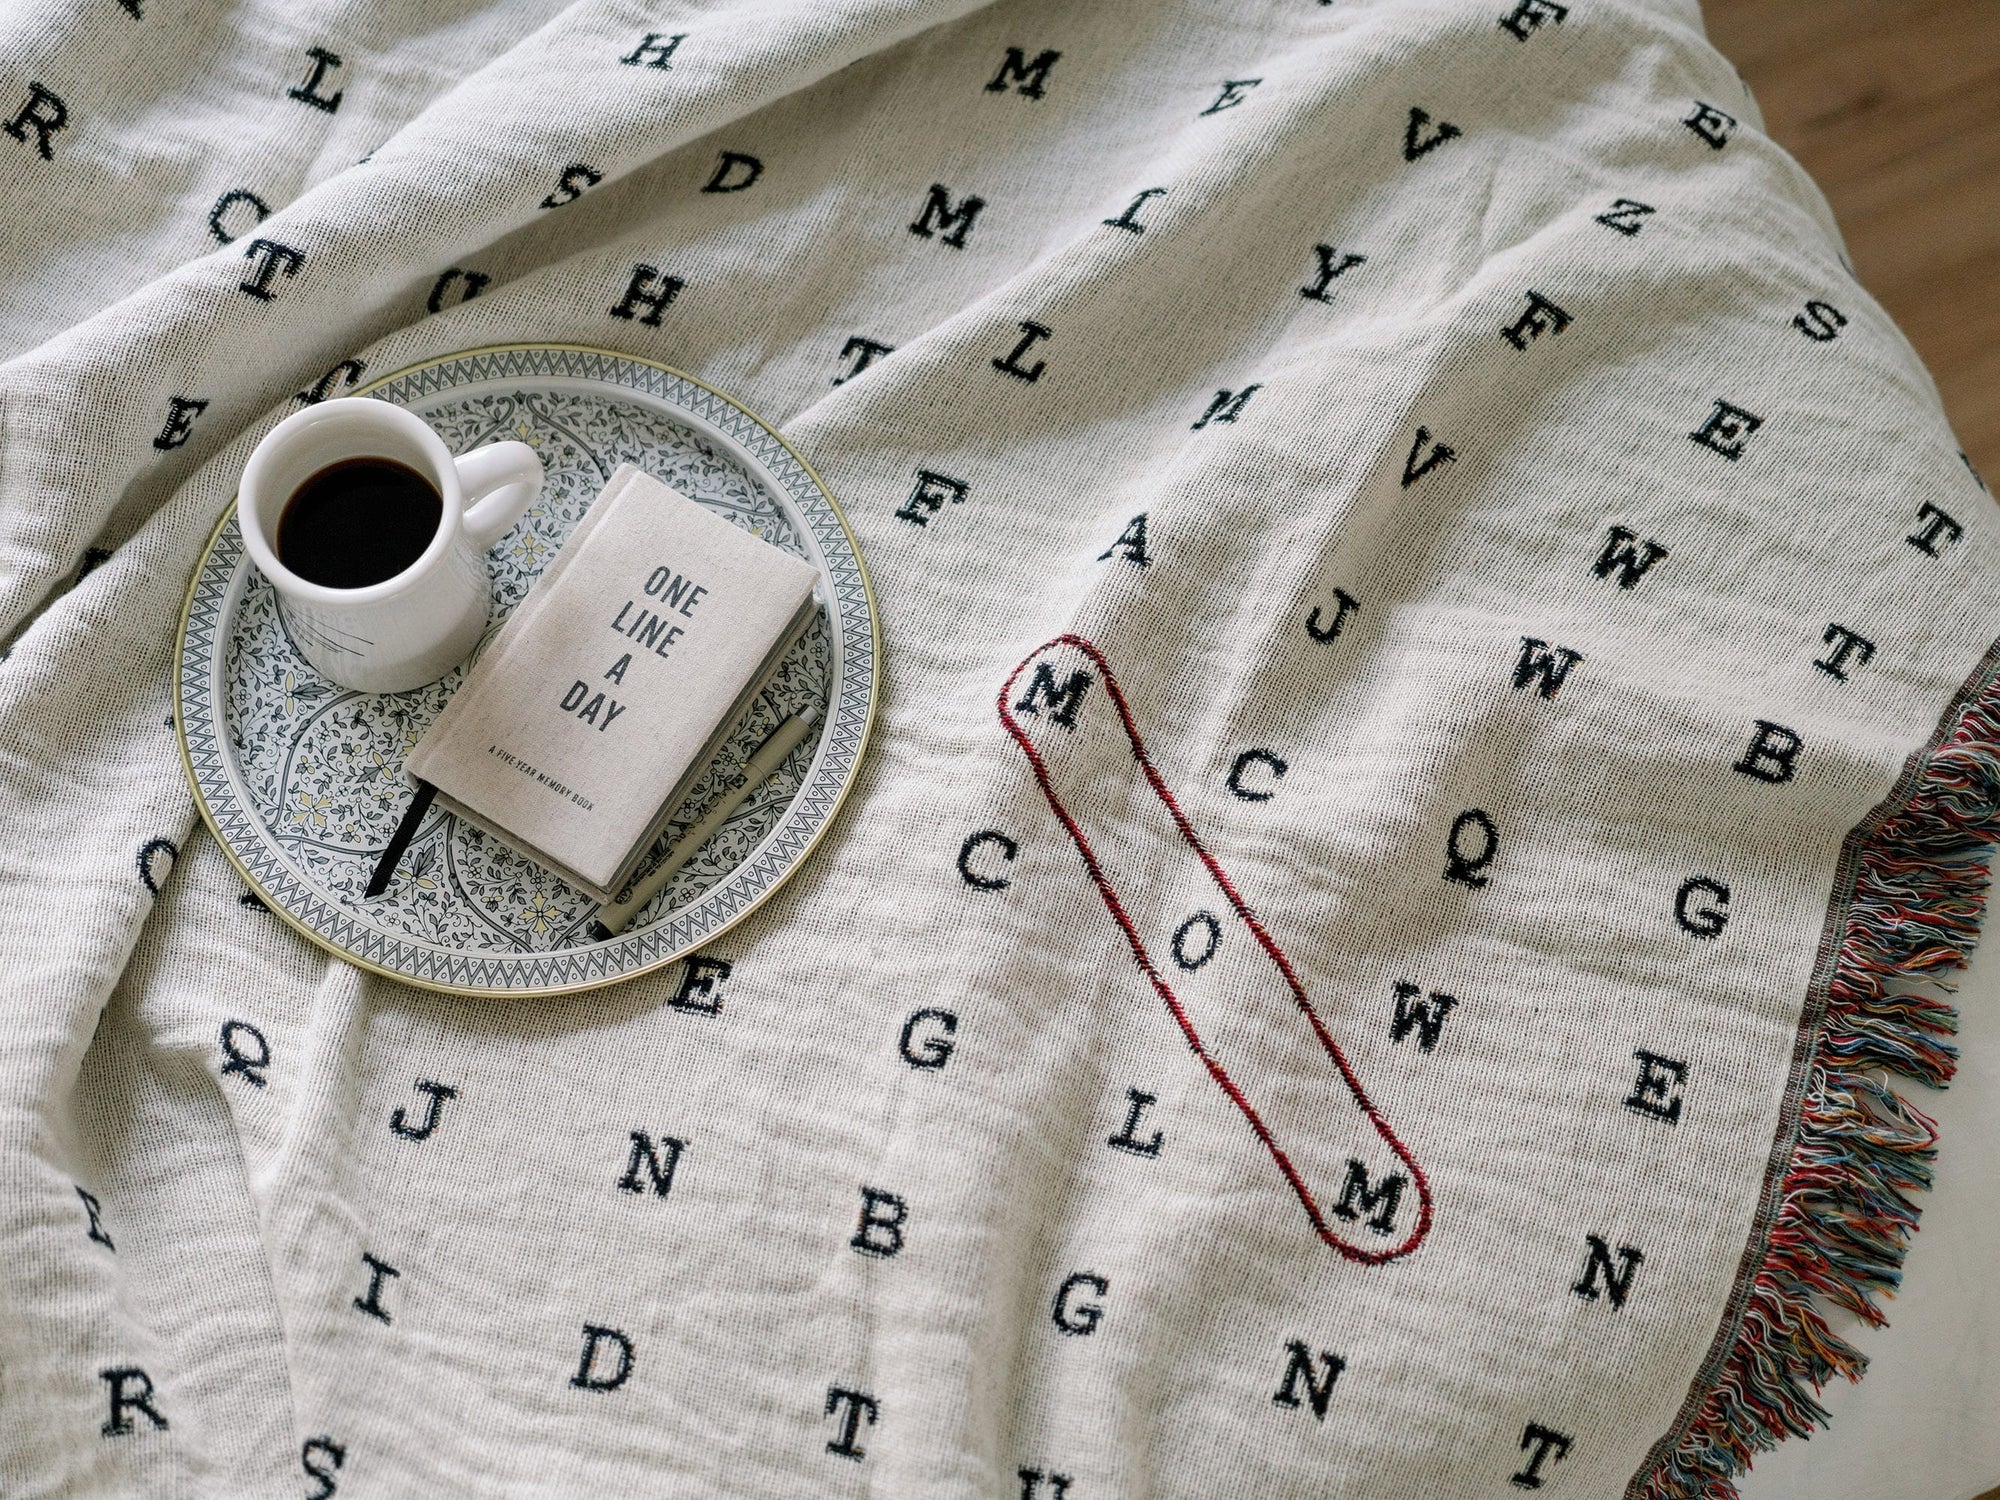 Word Search Throw Blanket